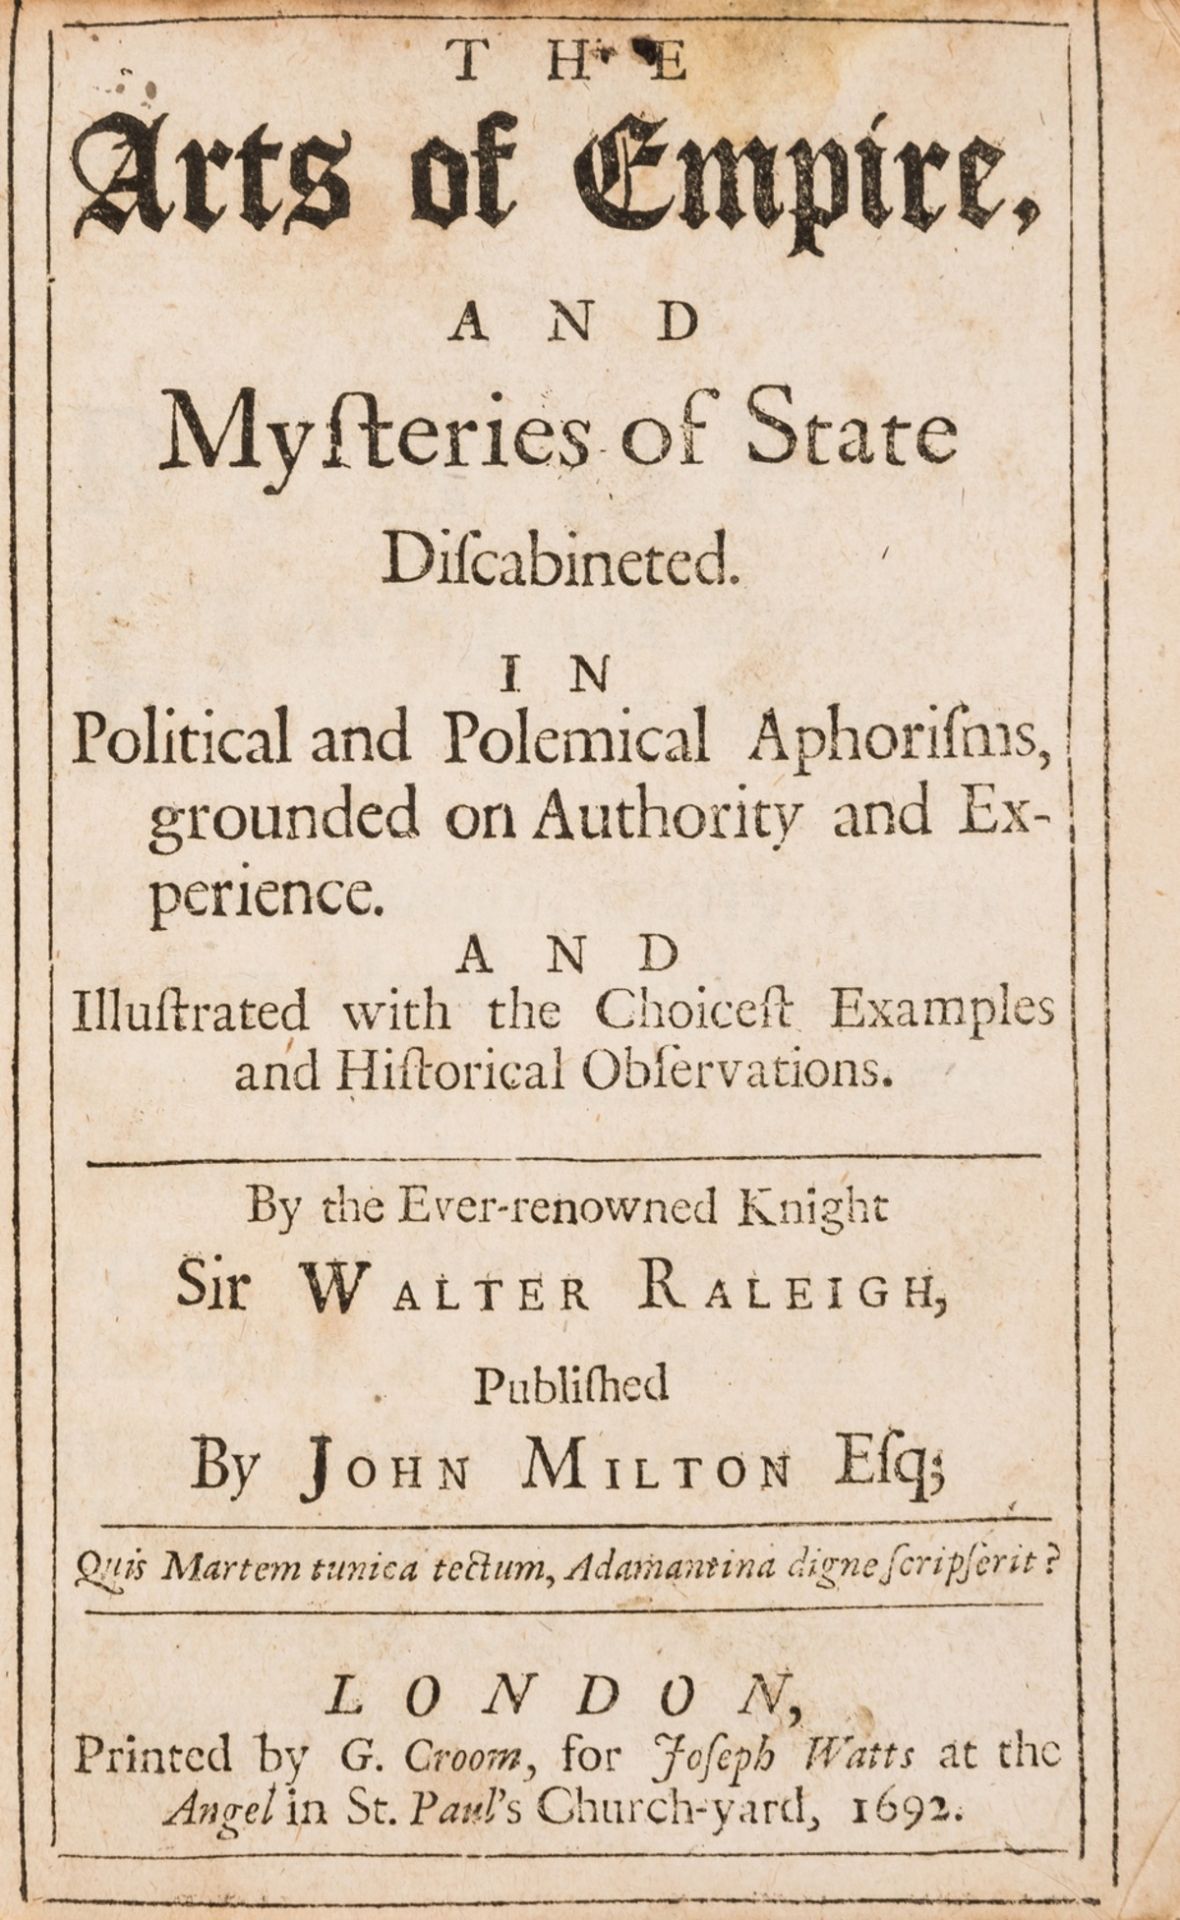 Raleigh (Sir Walter) The Arts of Empire, and Mysteries of State Discabineted, Printed by G. Croom, …